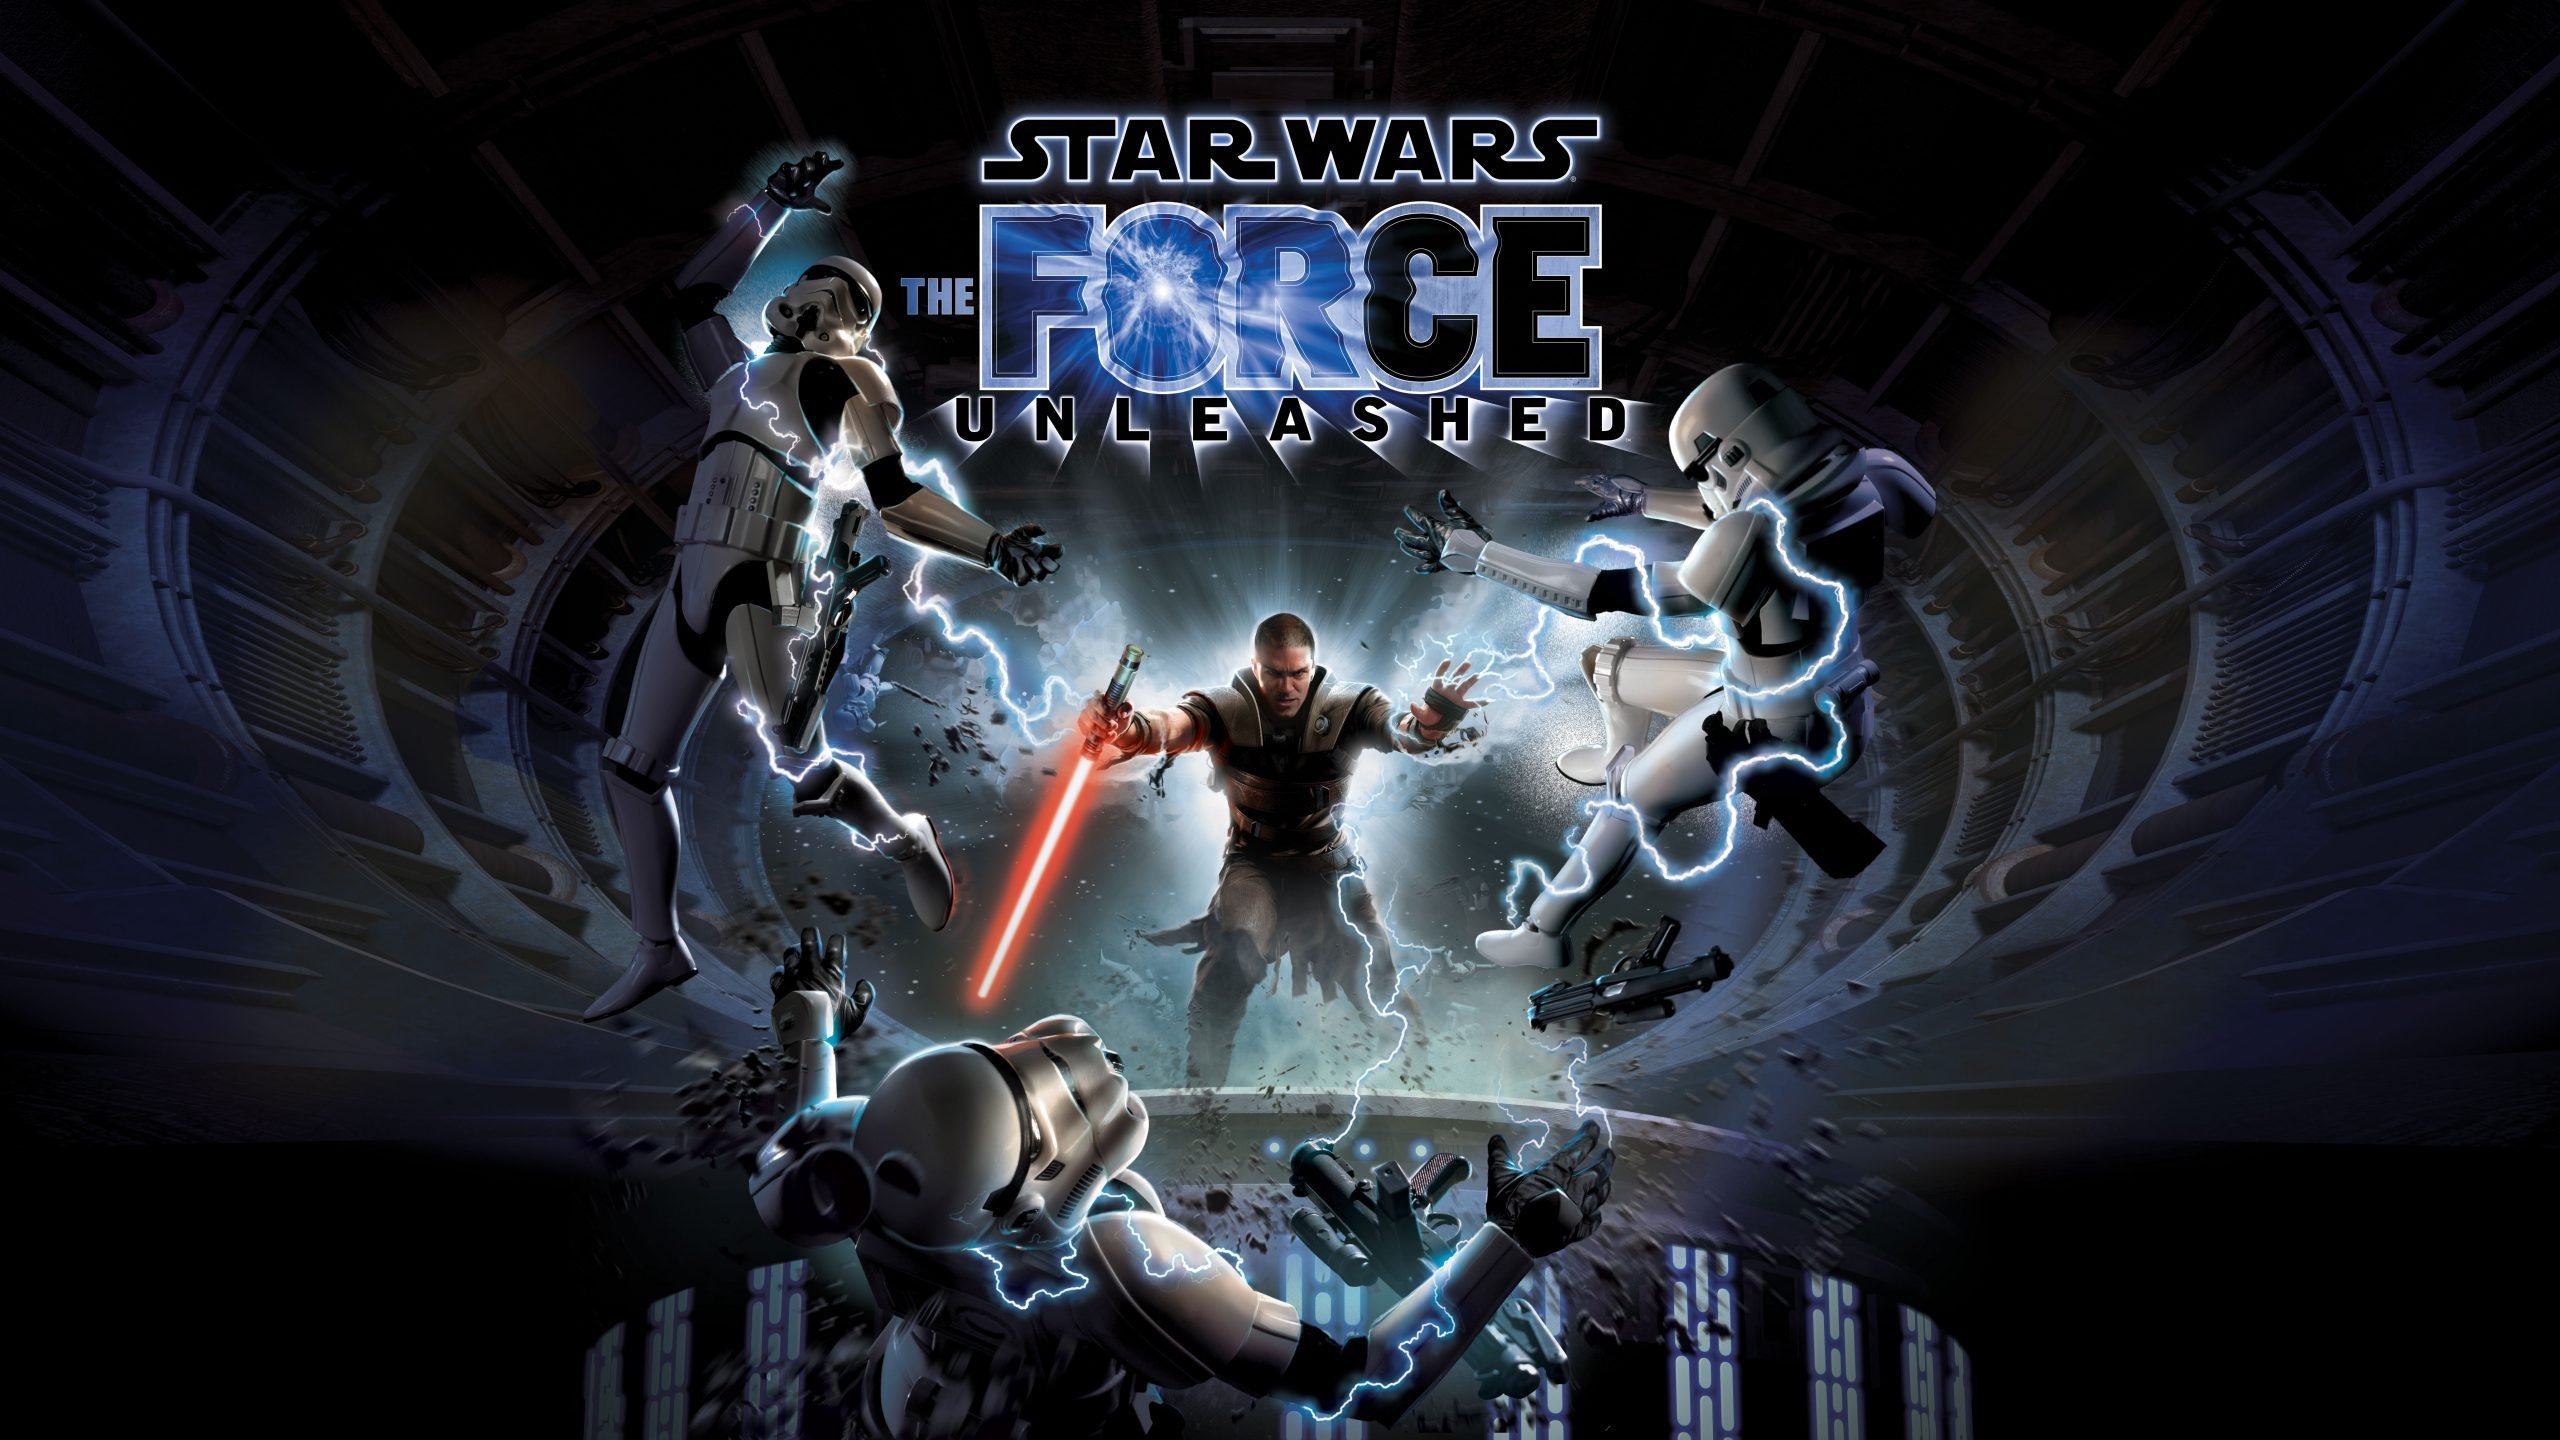 lego-star-wars-the-force-unleashed-wii-u-unofficial-game-guide-ebook-by-hse-games-rakuten-kobo